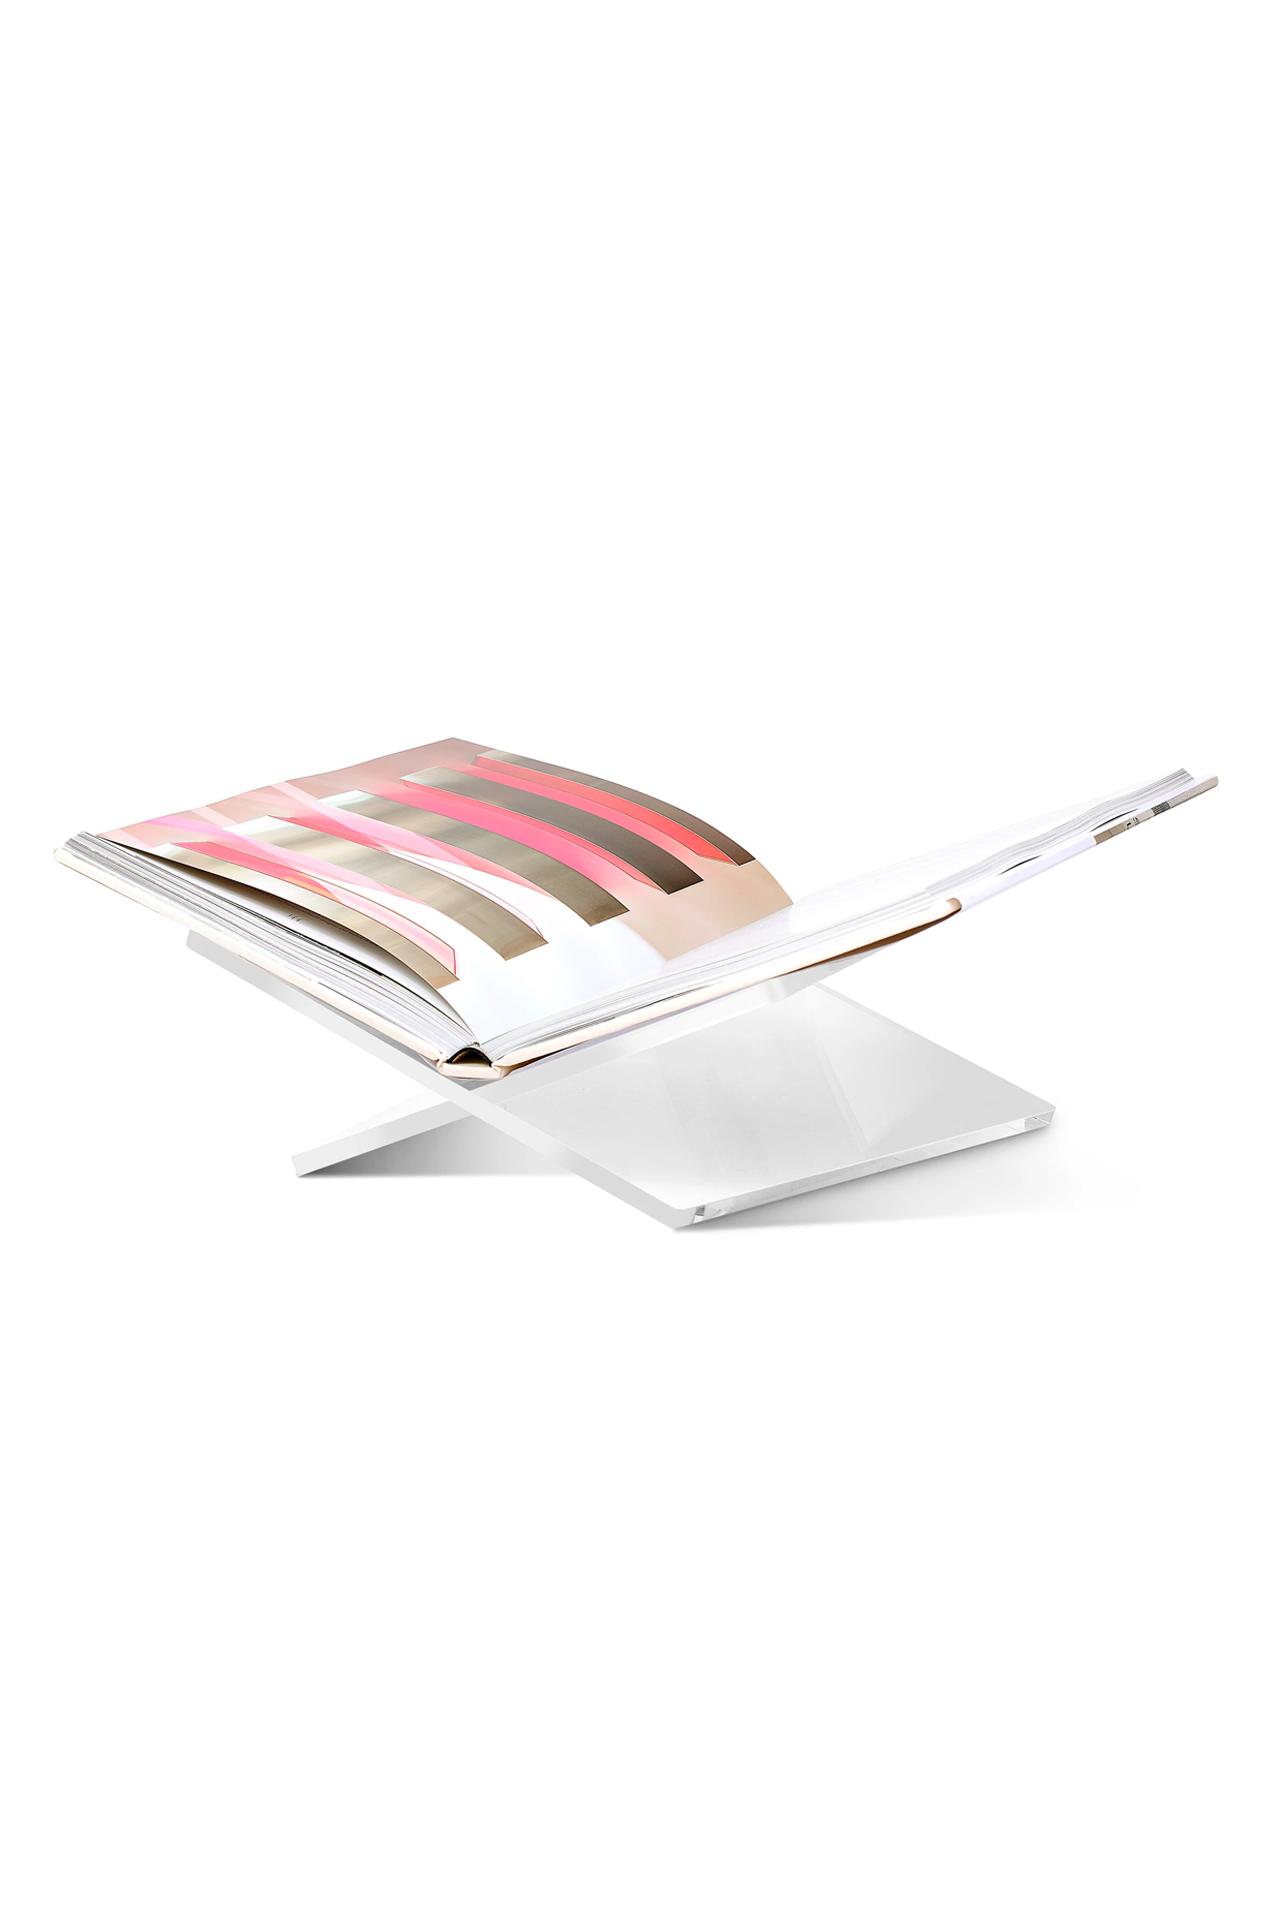 Assouline A Bookstand White with a Book Image (6637675905139)